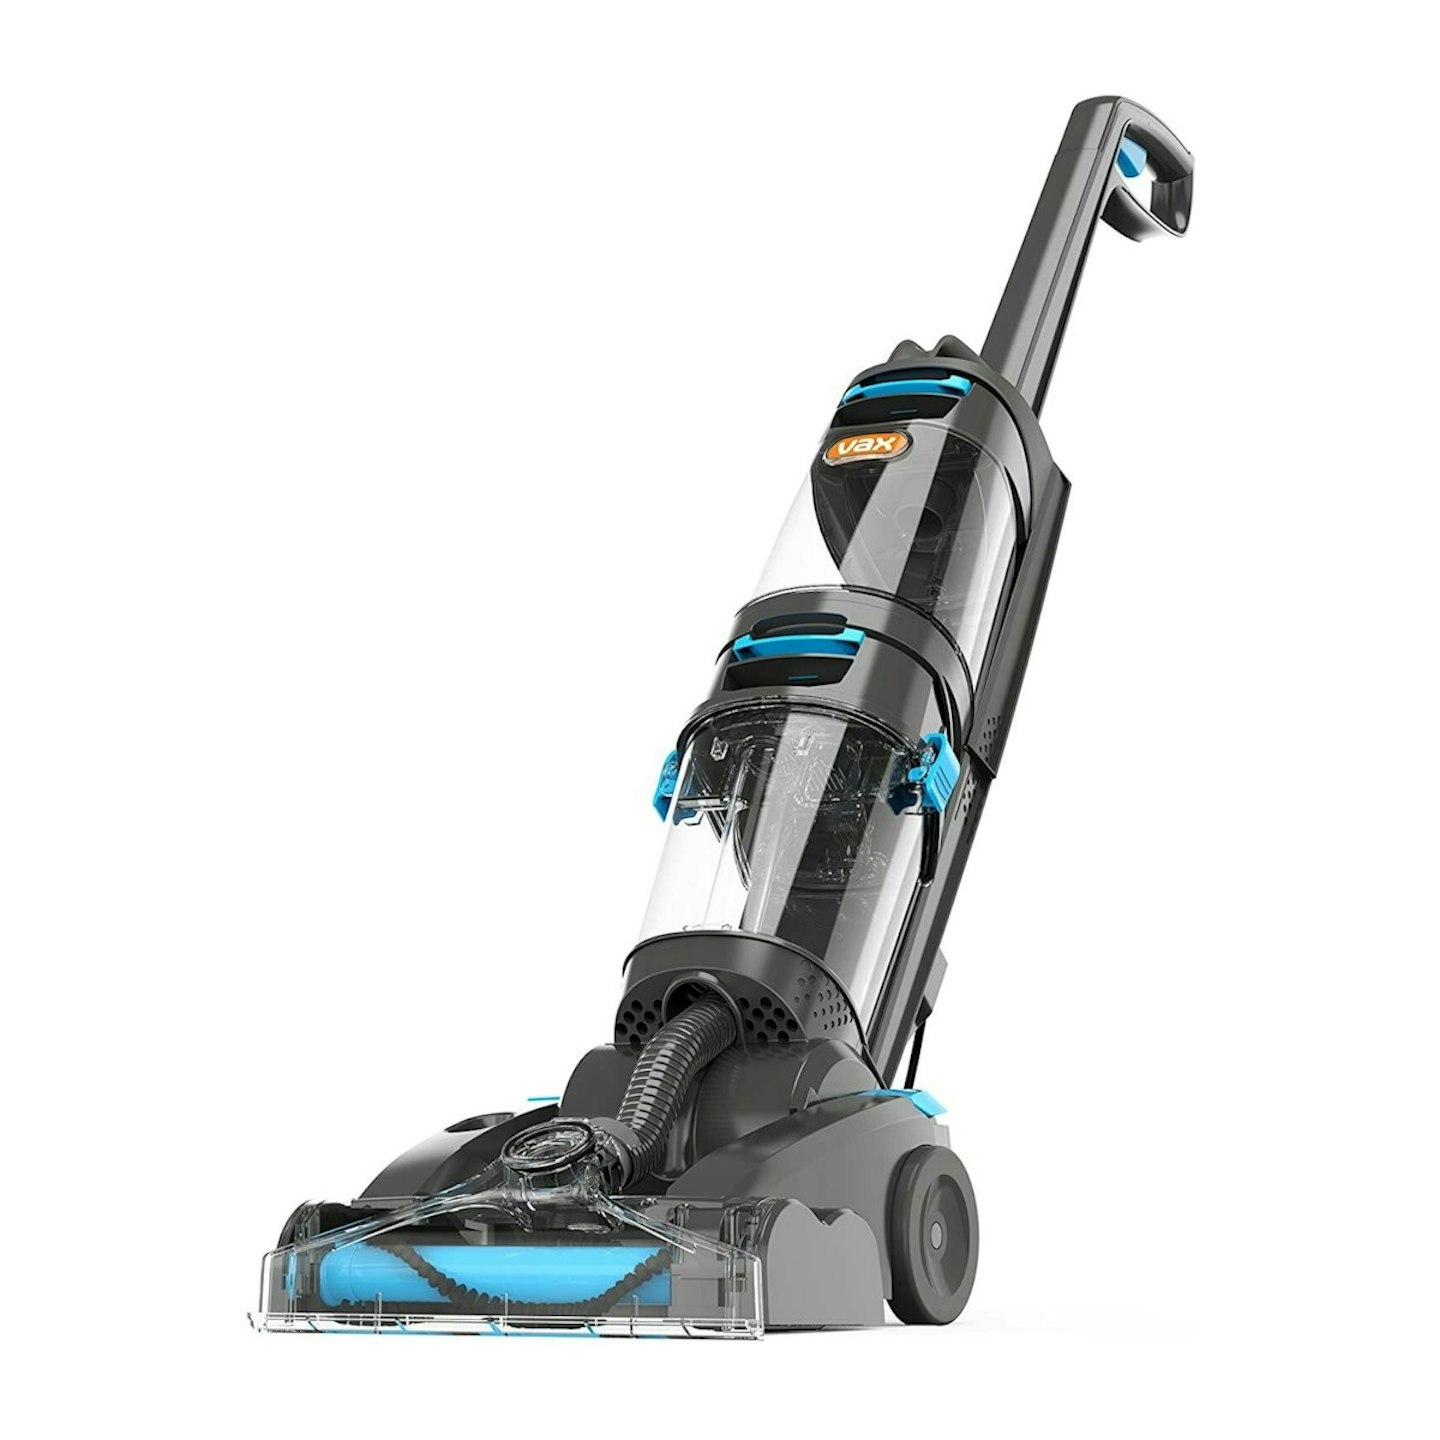 Vax Dual Power Advance Upright Carpet Cleaner